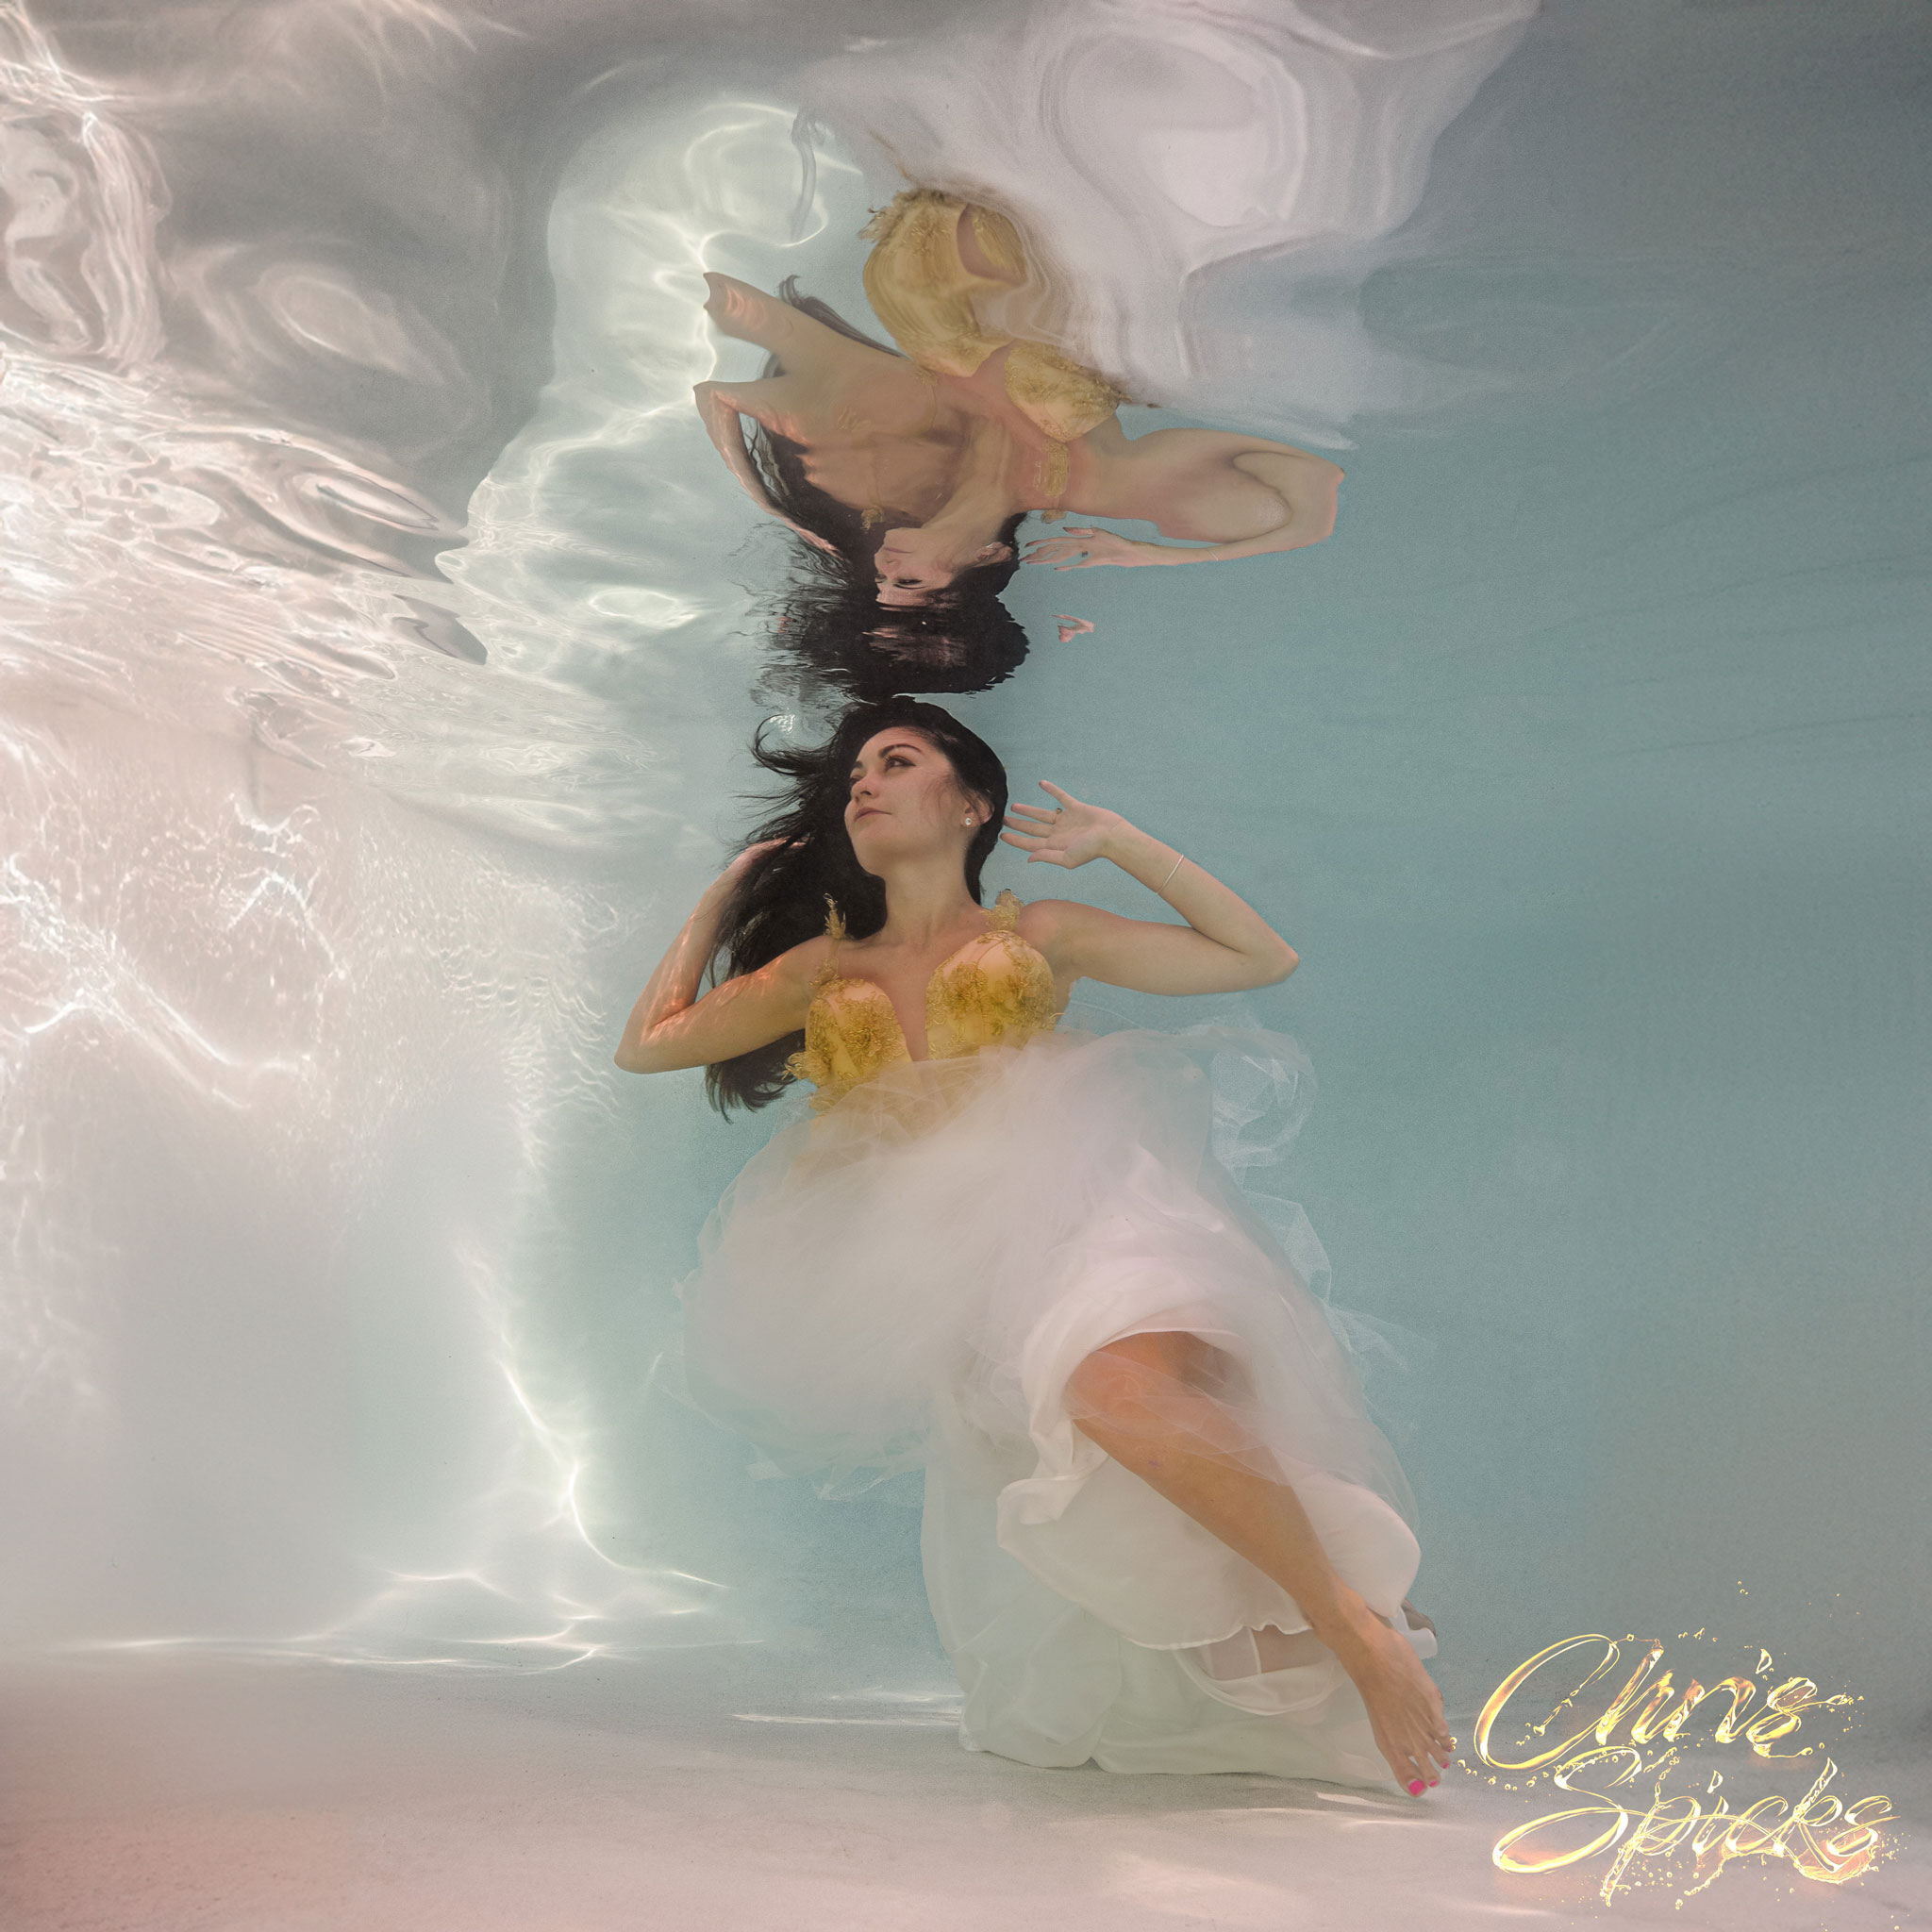 A woman in a yellow and white dress floats underwater, her reflection visible on the water's surface.